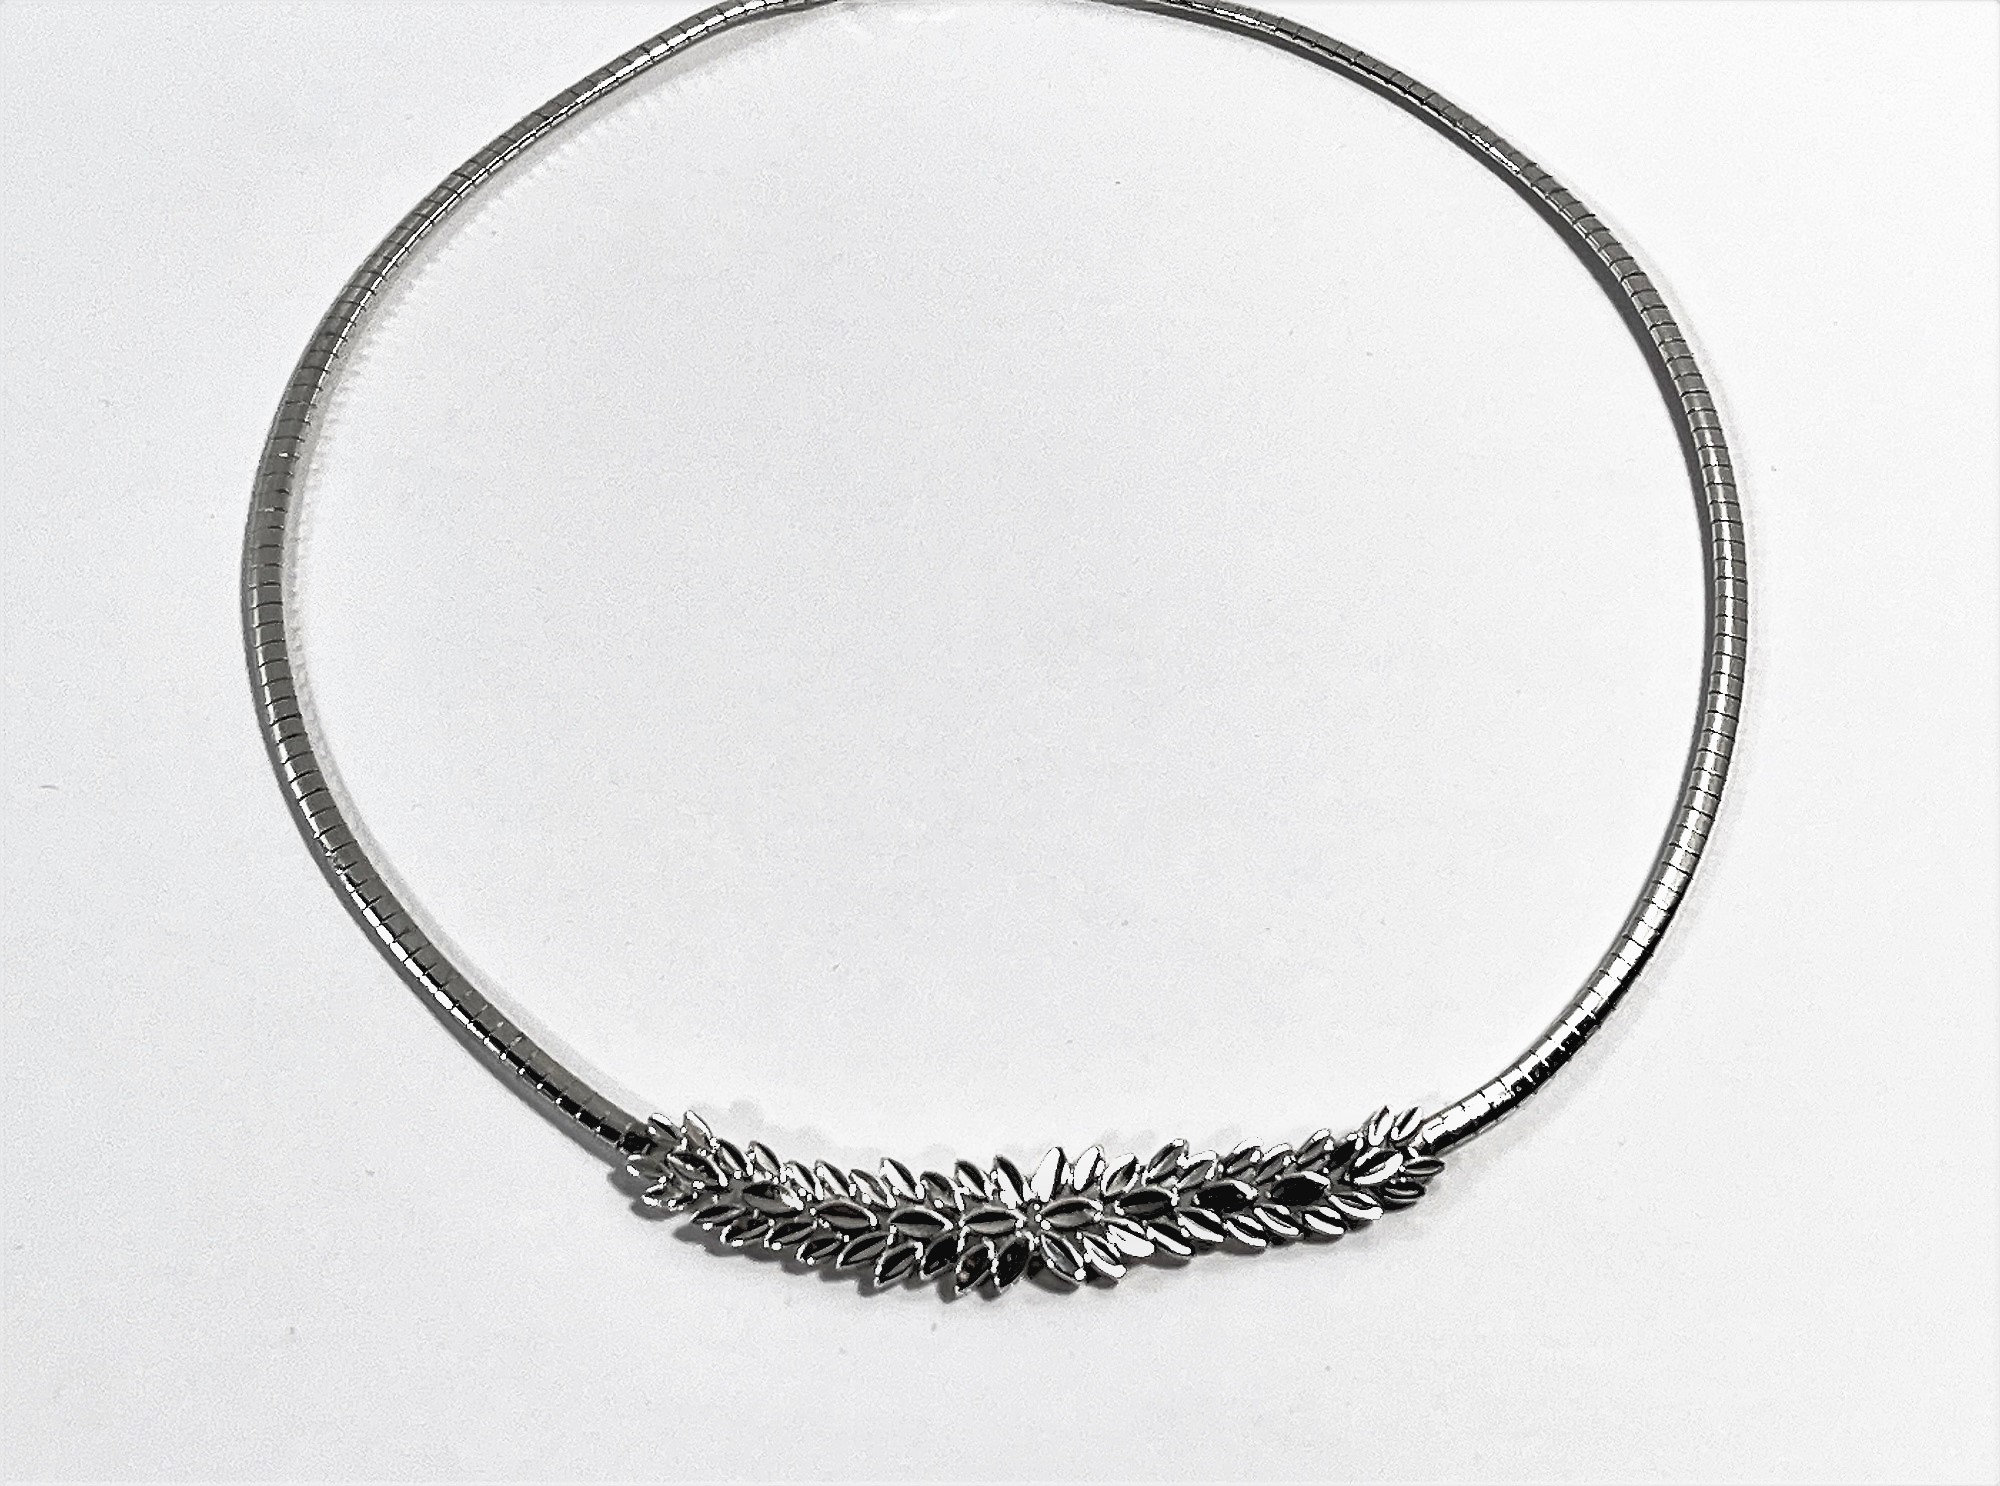 Buy Omega Chain, 925 Sterling Silver Necklace for Women, Round Omega Chain  Necklace, Completed Omega Necklace, 16, 18, 20 Online in India - Etsy